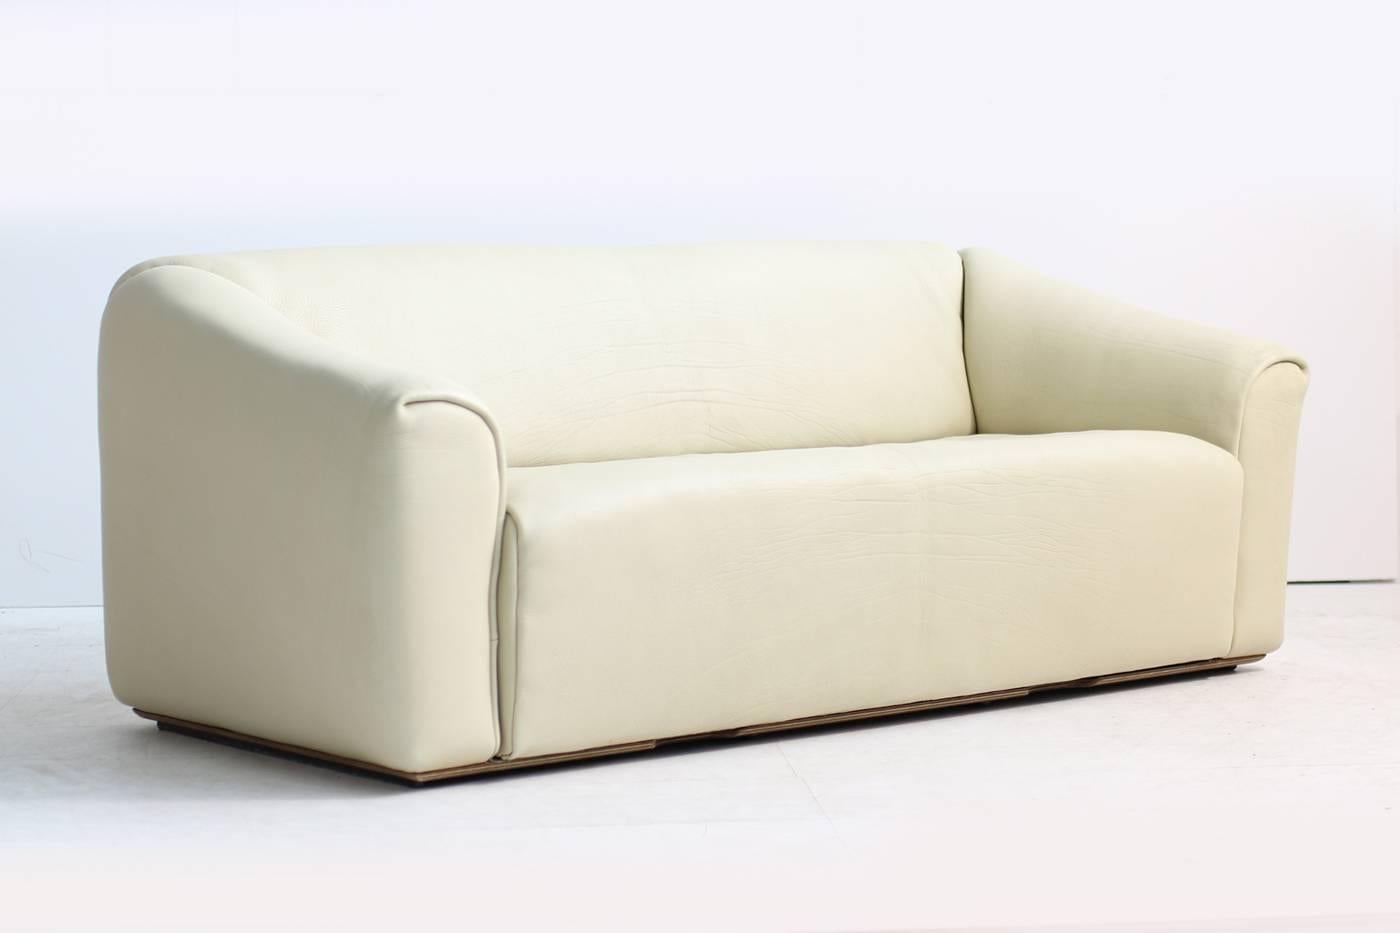 Beautiful three-seat buffalo leather Sofa by De Sede, Mod. DS 47
An extendable seat, which can be pulled out for ca. 17cm more seat depth.
Fantastic condition, very unique in ecru leather, natural leather color, very rare, small edition or made to